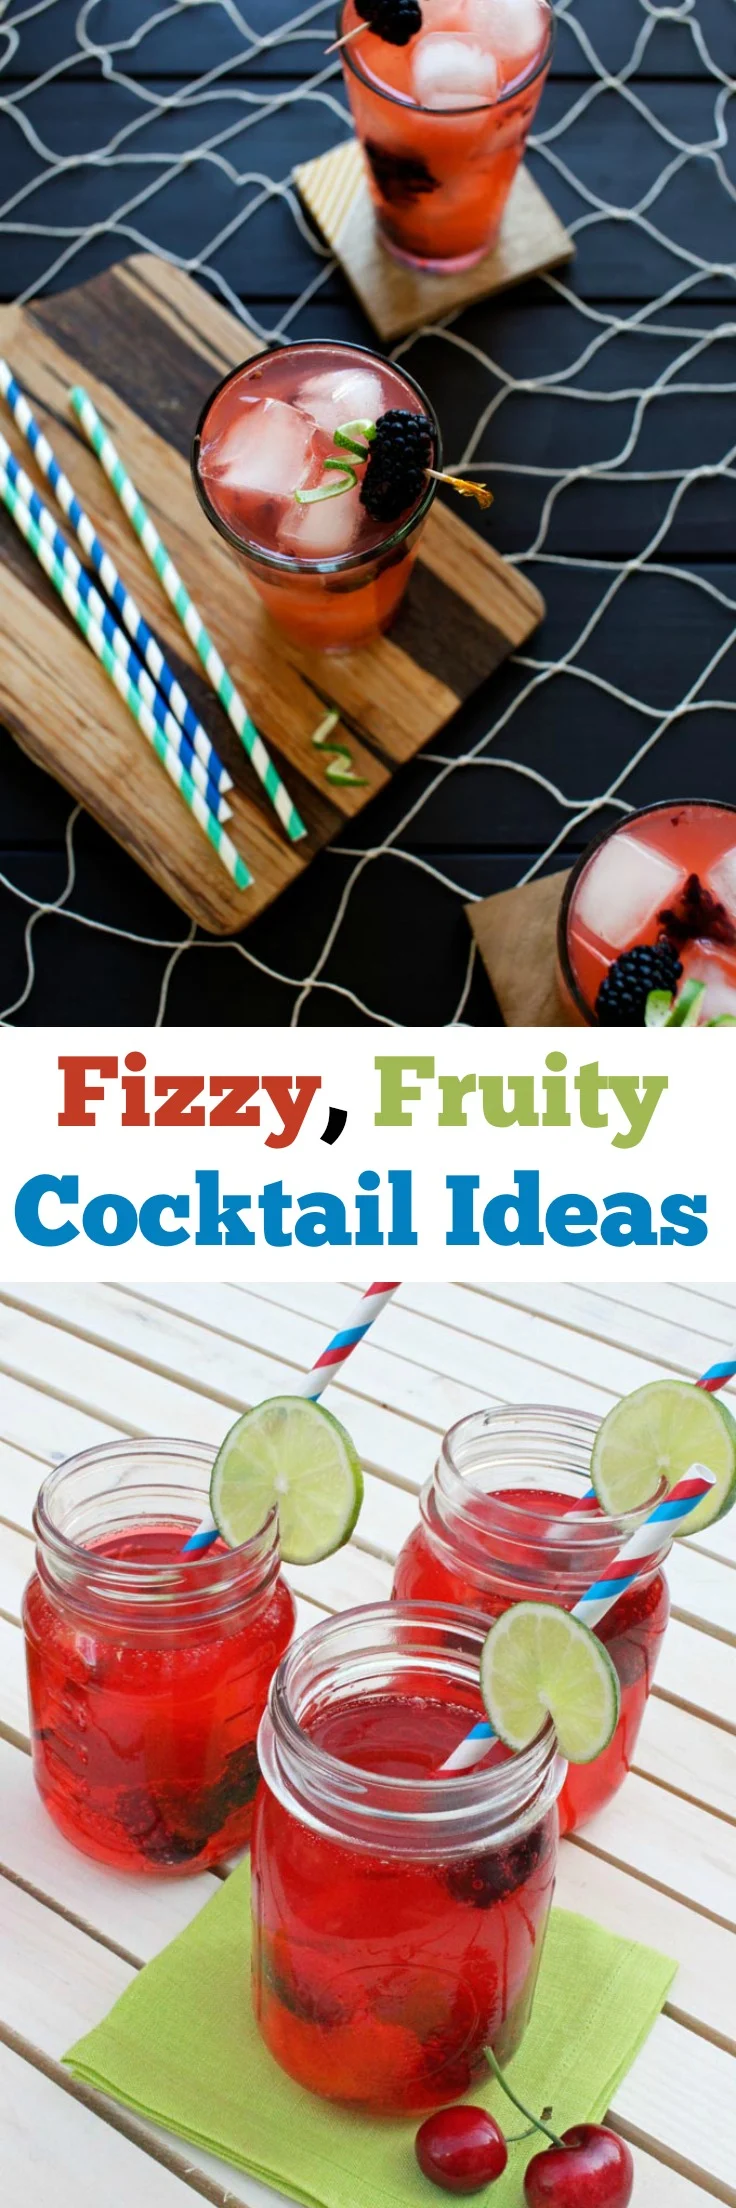 4 Fizzy, Fruity Cocktail Recipes to Enjoy This Summer